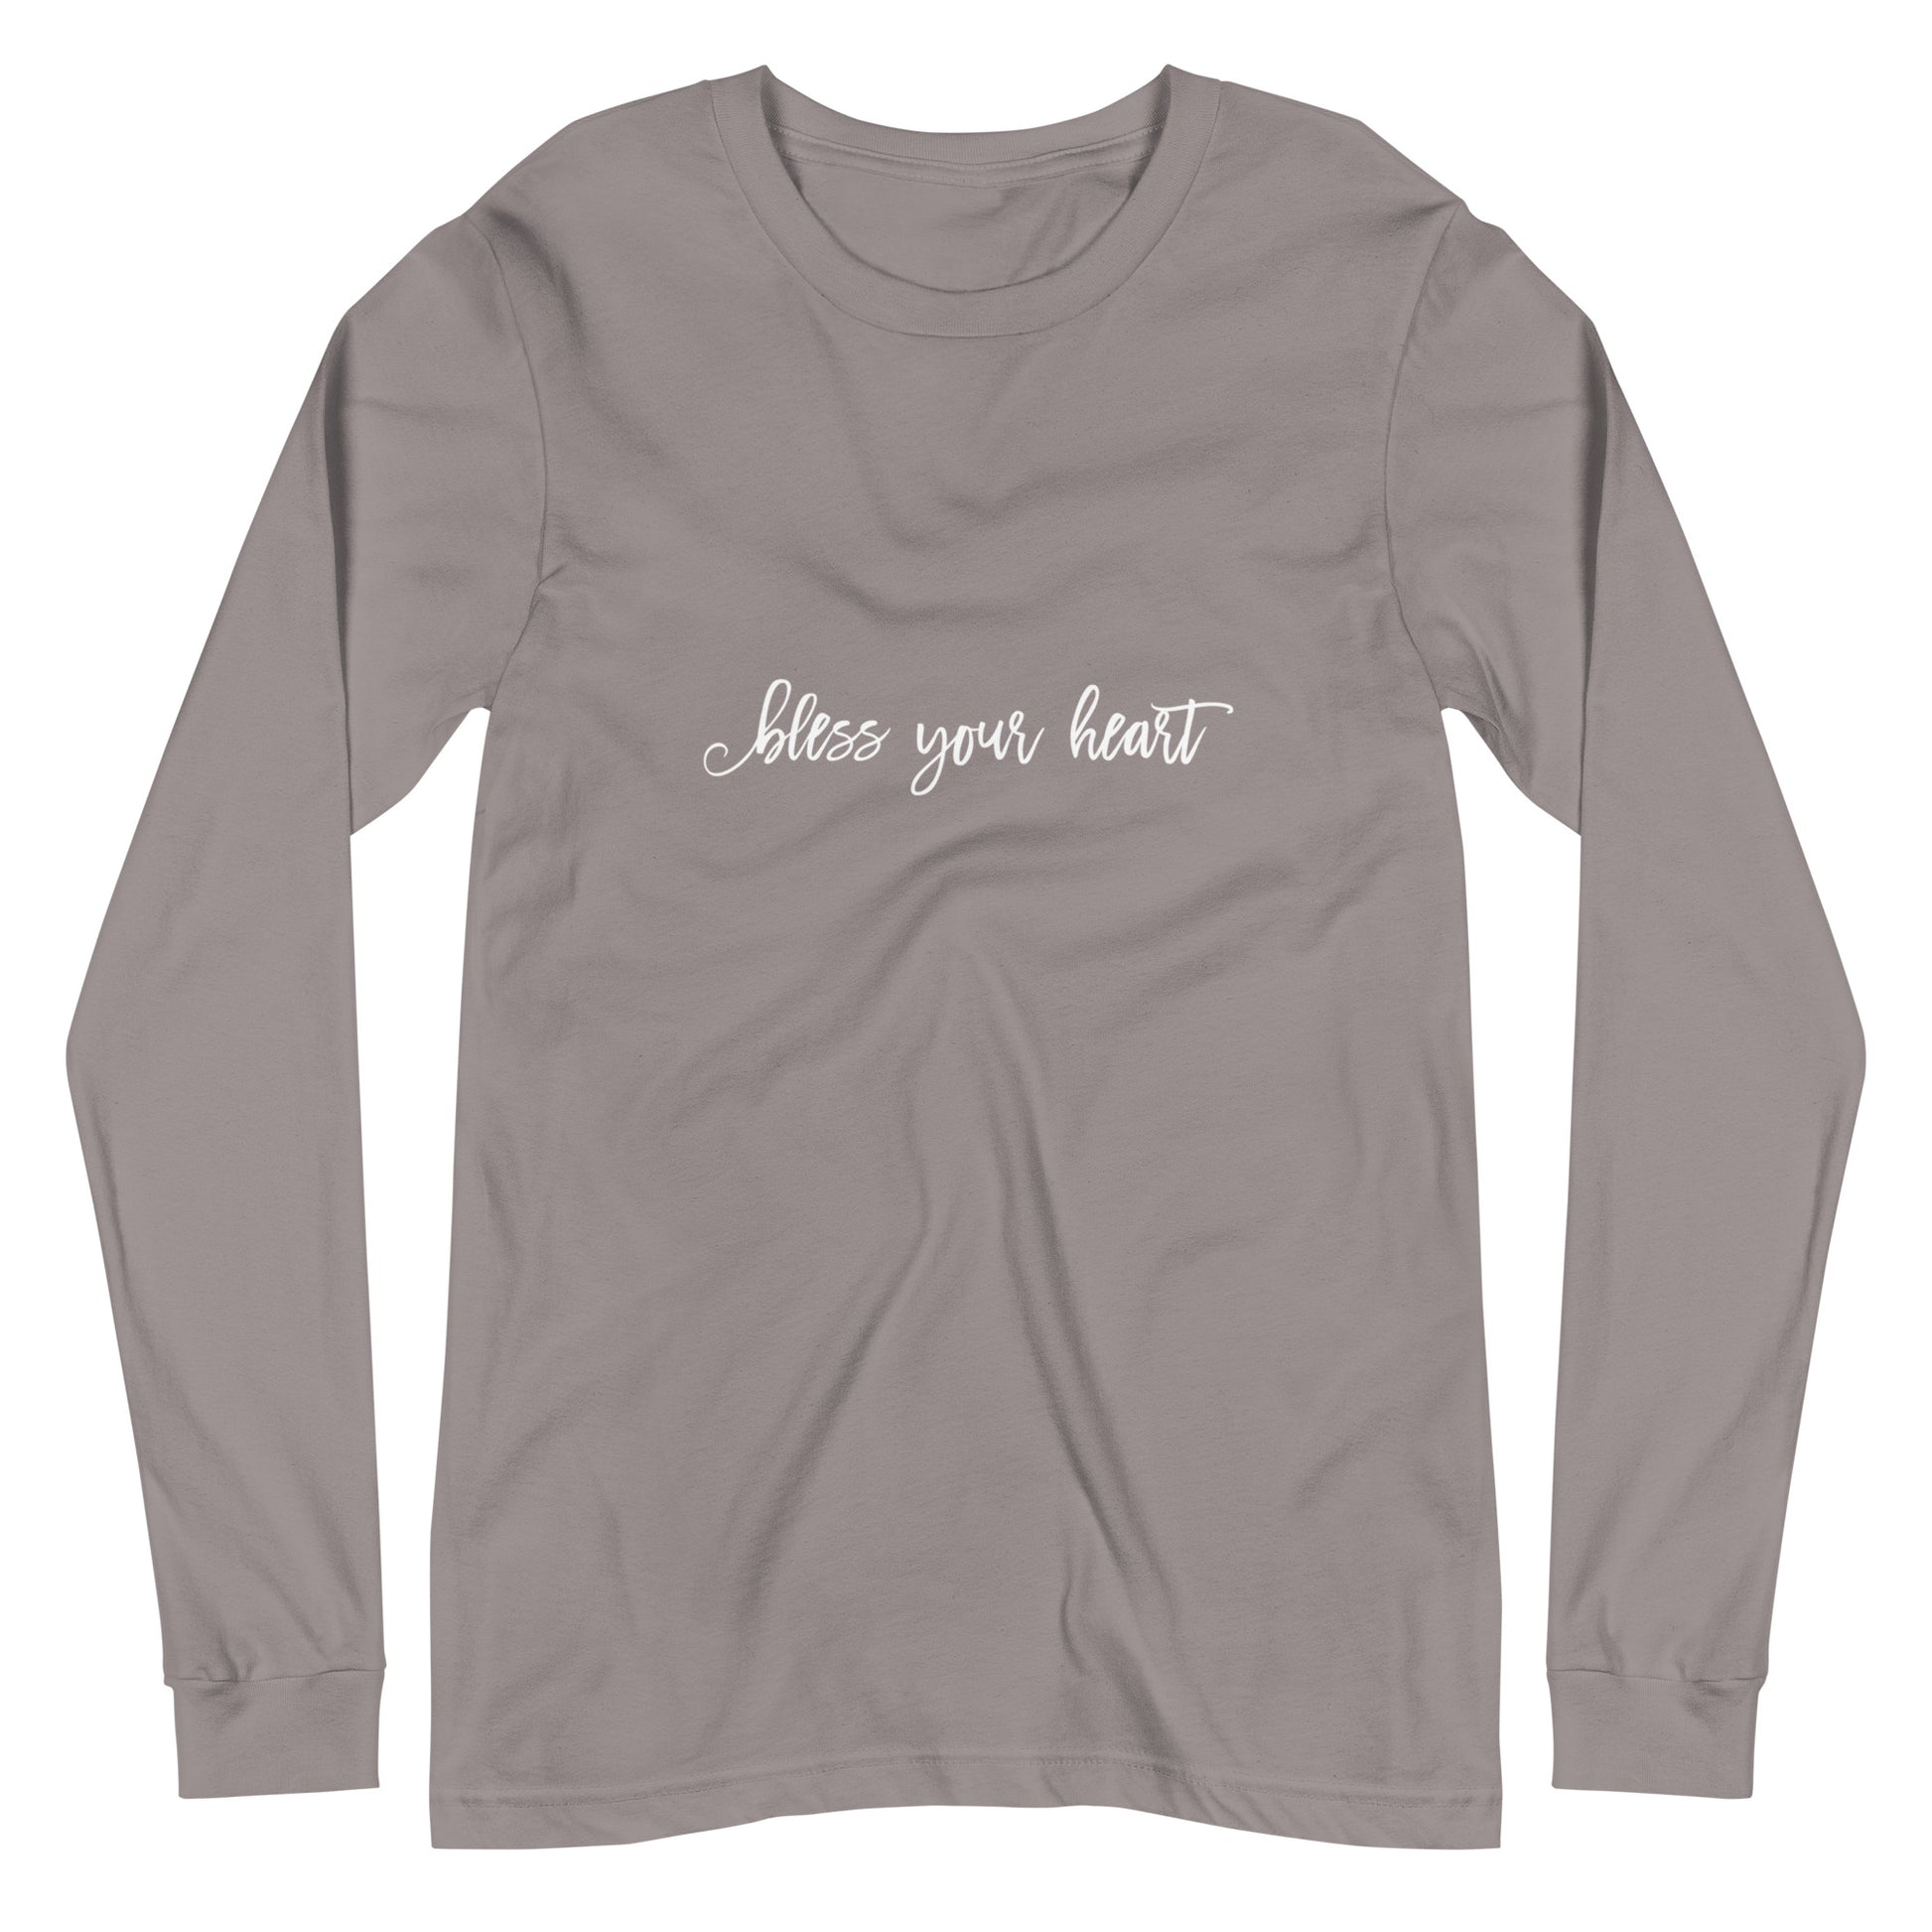 Storm grey Dark Grey Heather long-sleeve t-shirt with white graphic in an excessively twee font: "bless your heart"